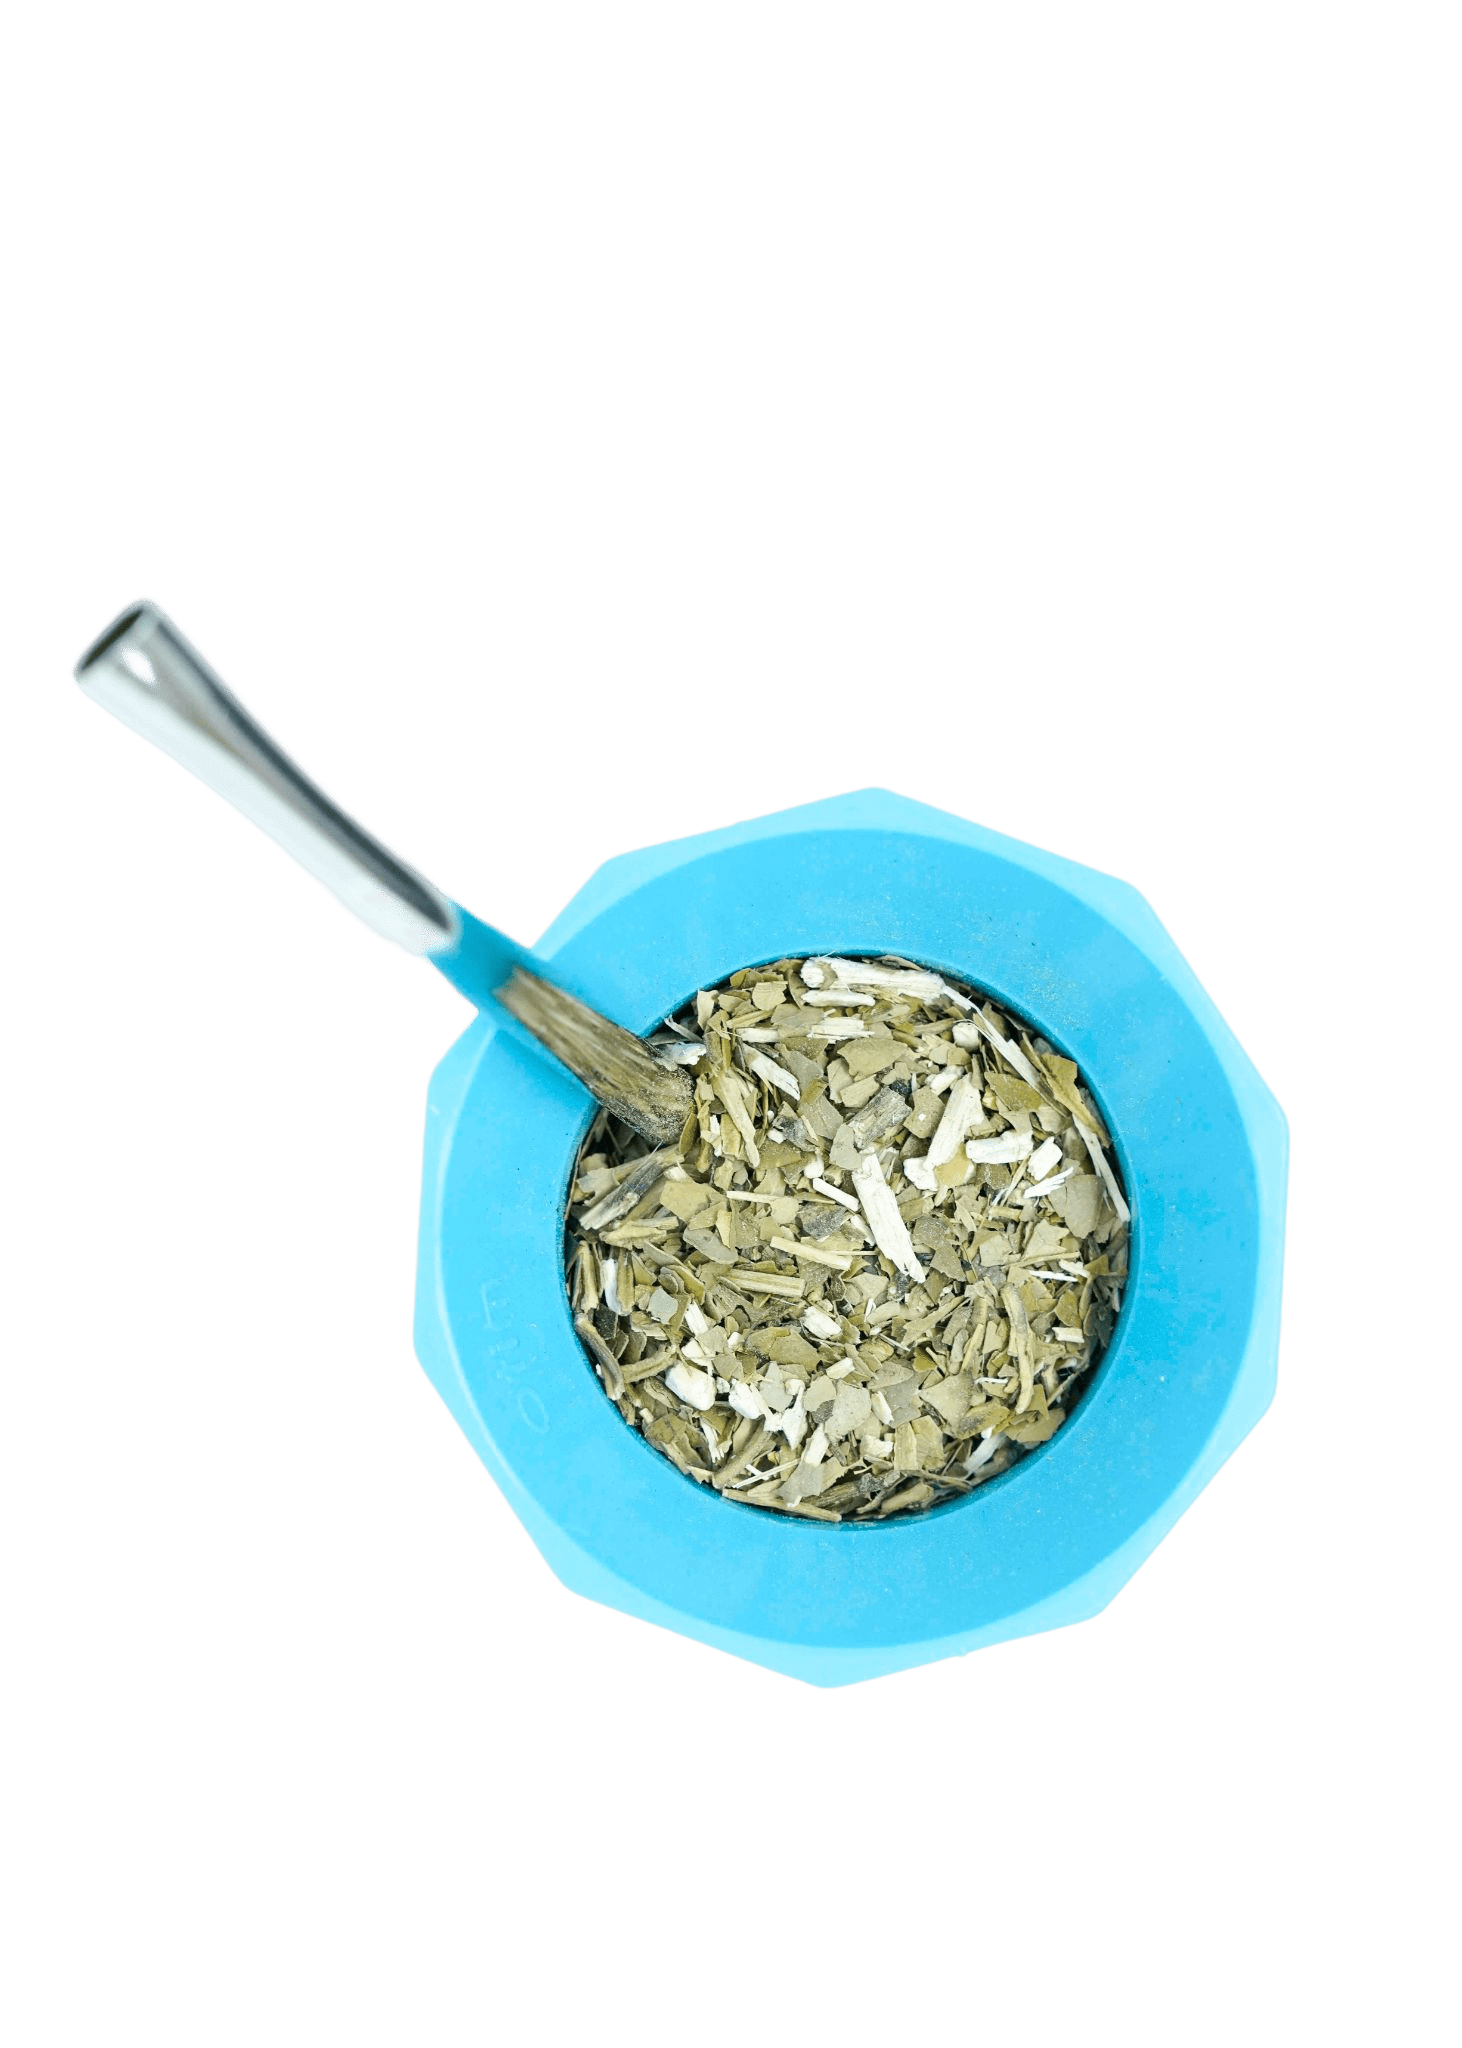 Mito Mate Gourd with Self-extracting Straw (Mate and Bombilla)